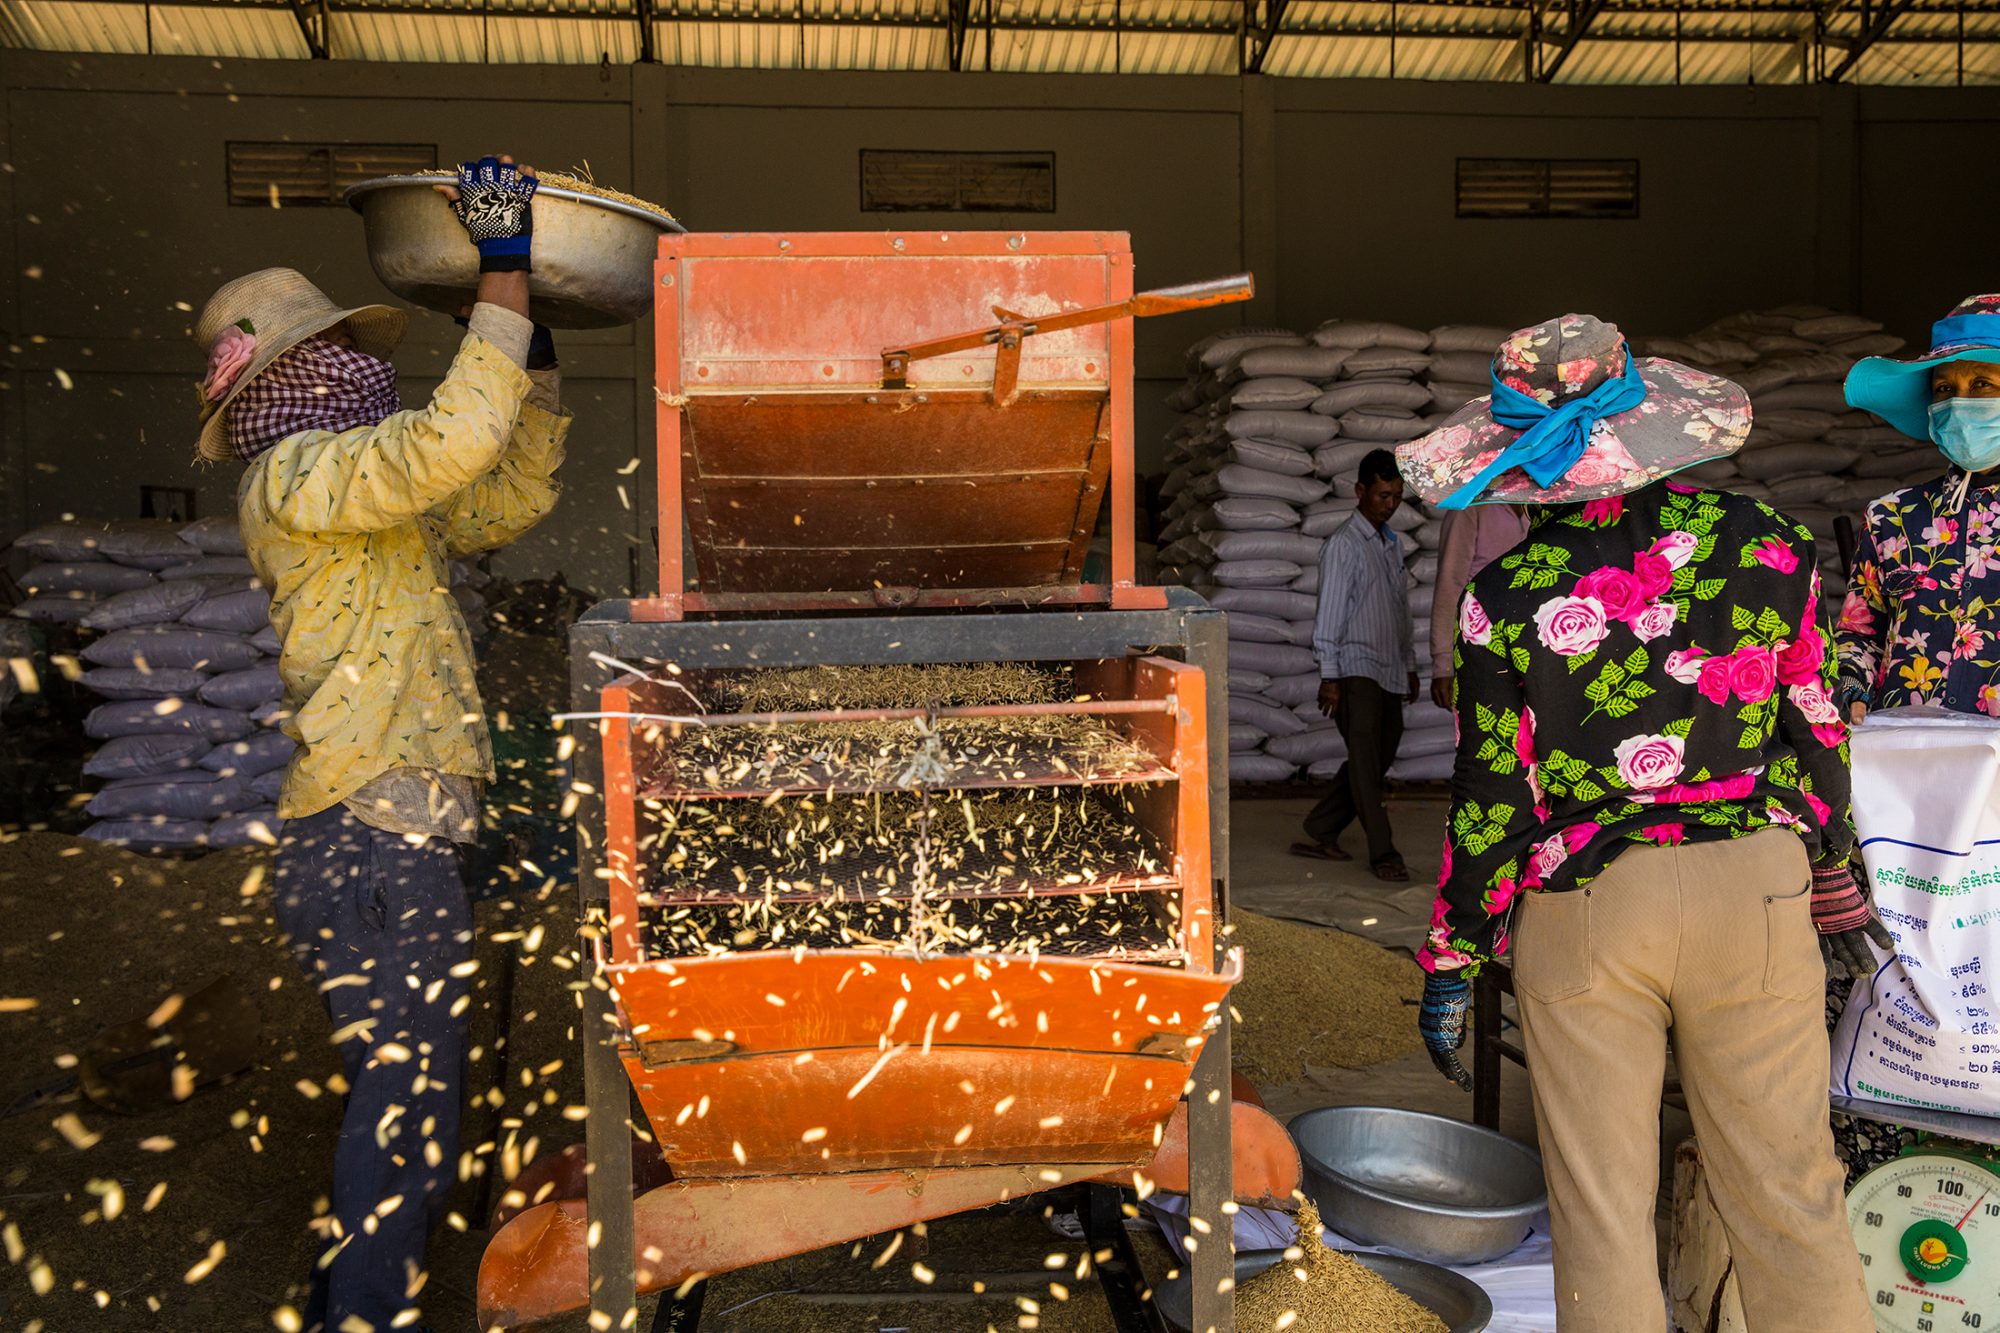 A woman pours rice into a machine that shoots rice husks into the air and separates the kernels